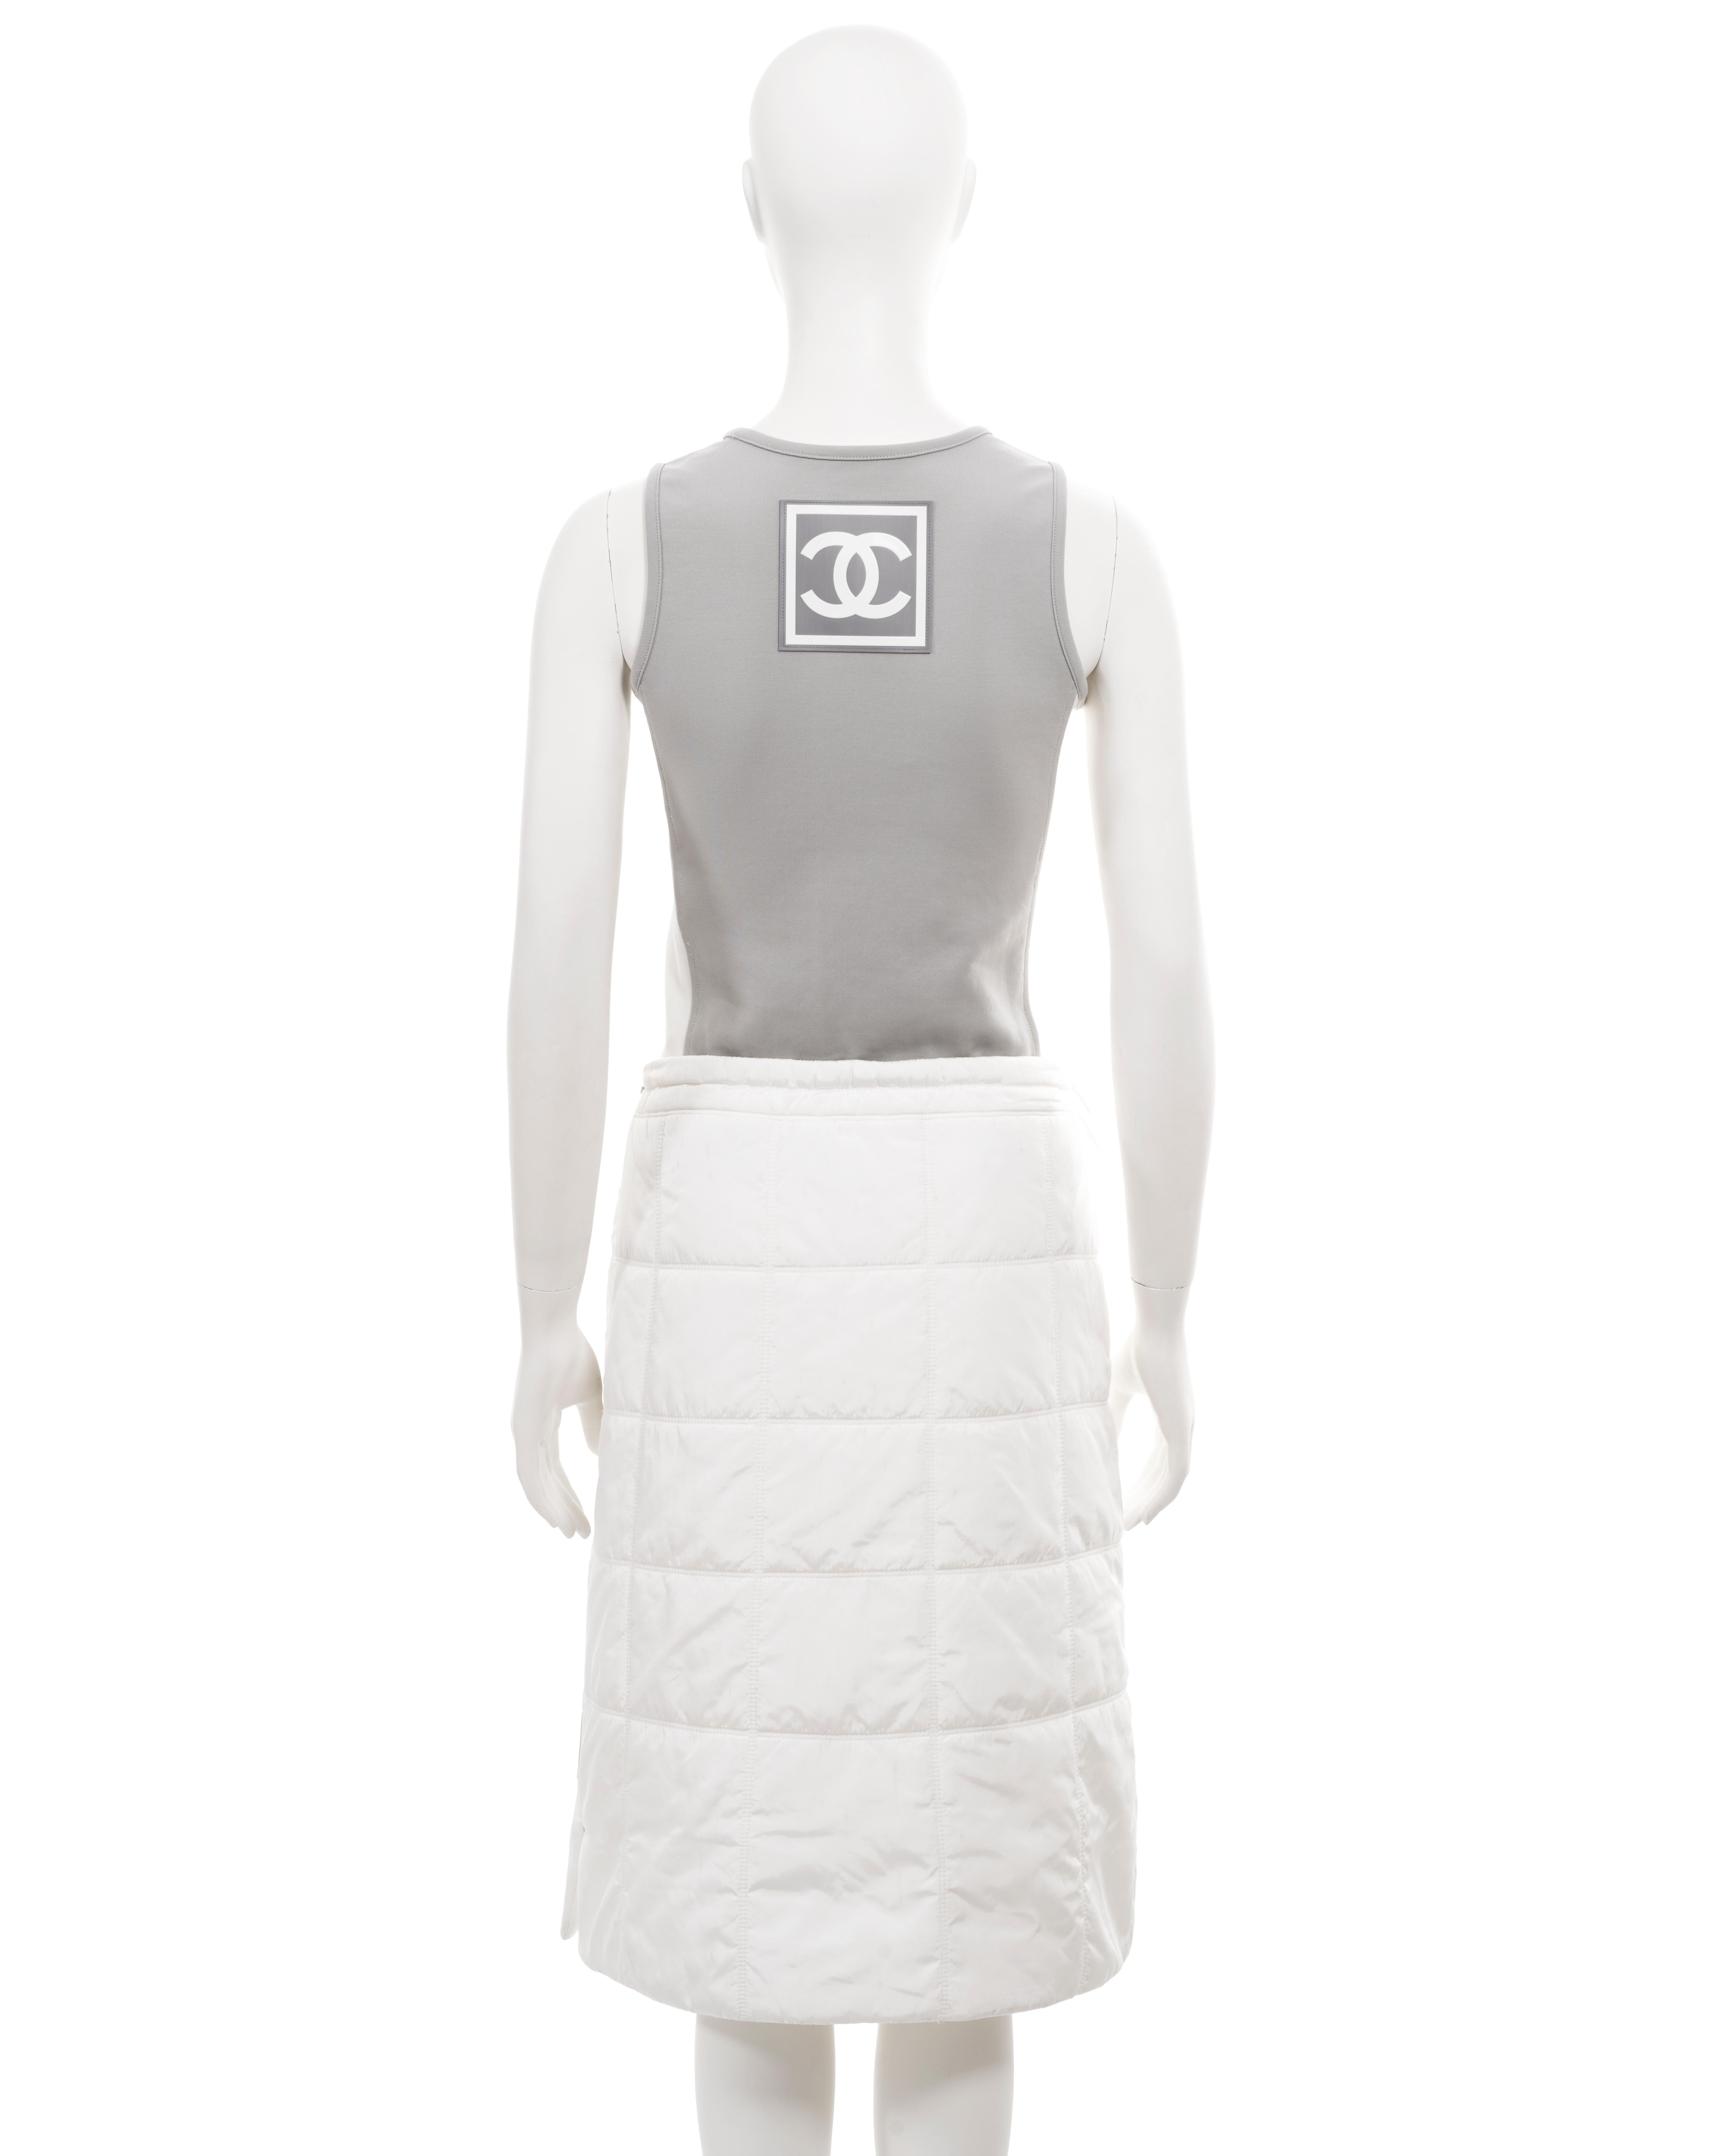 Chanel by Karl Lagerfeld white quilted nylon skirt and sports vest, ss 2001 For Sale 5